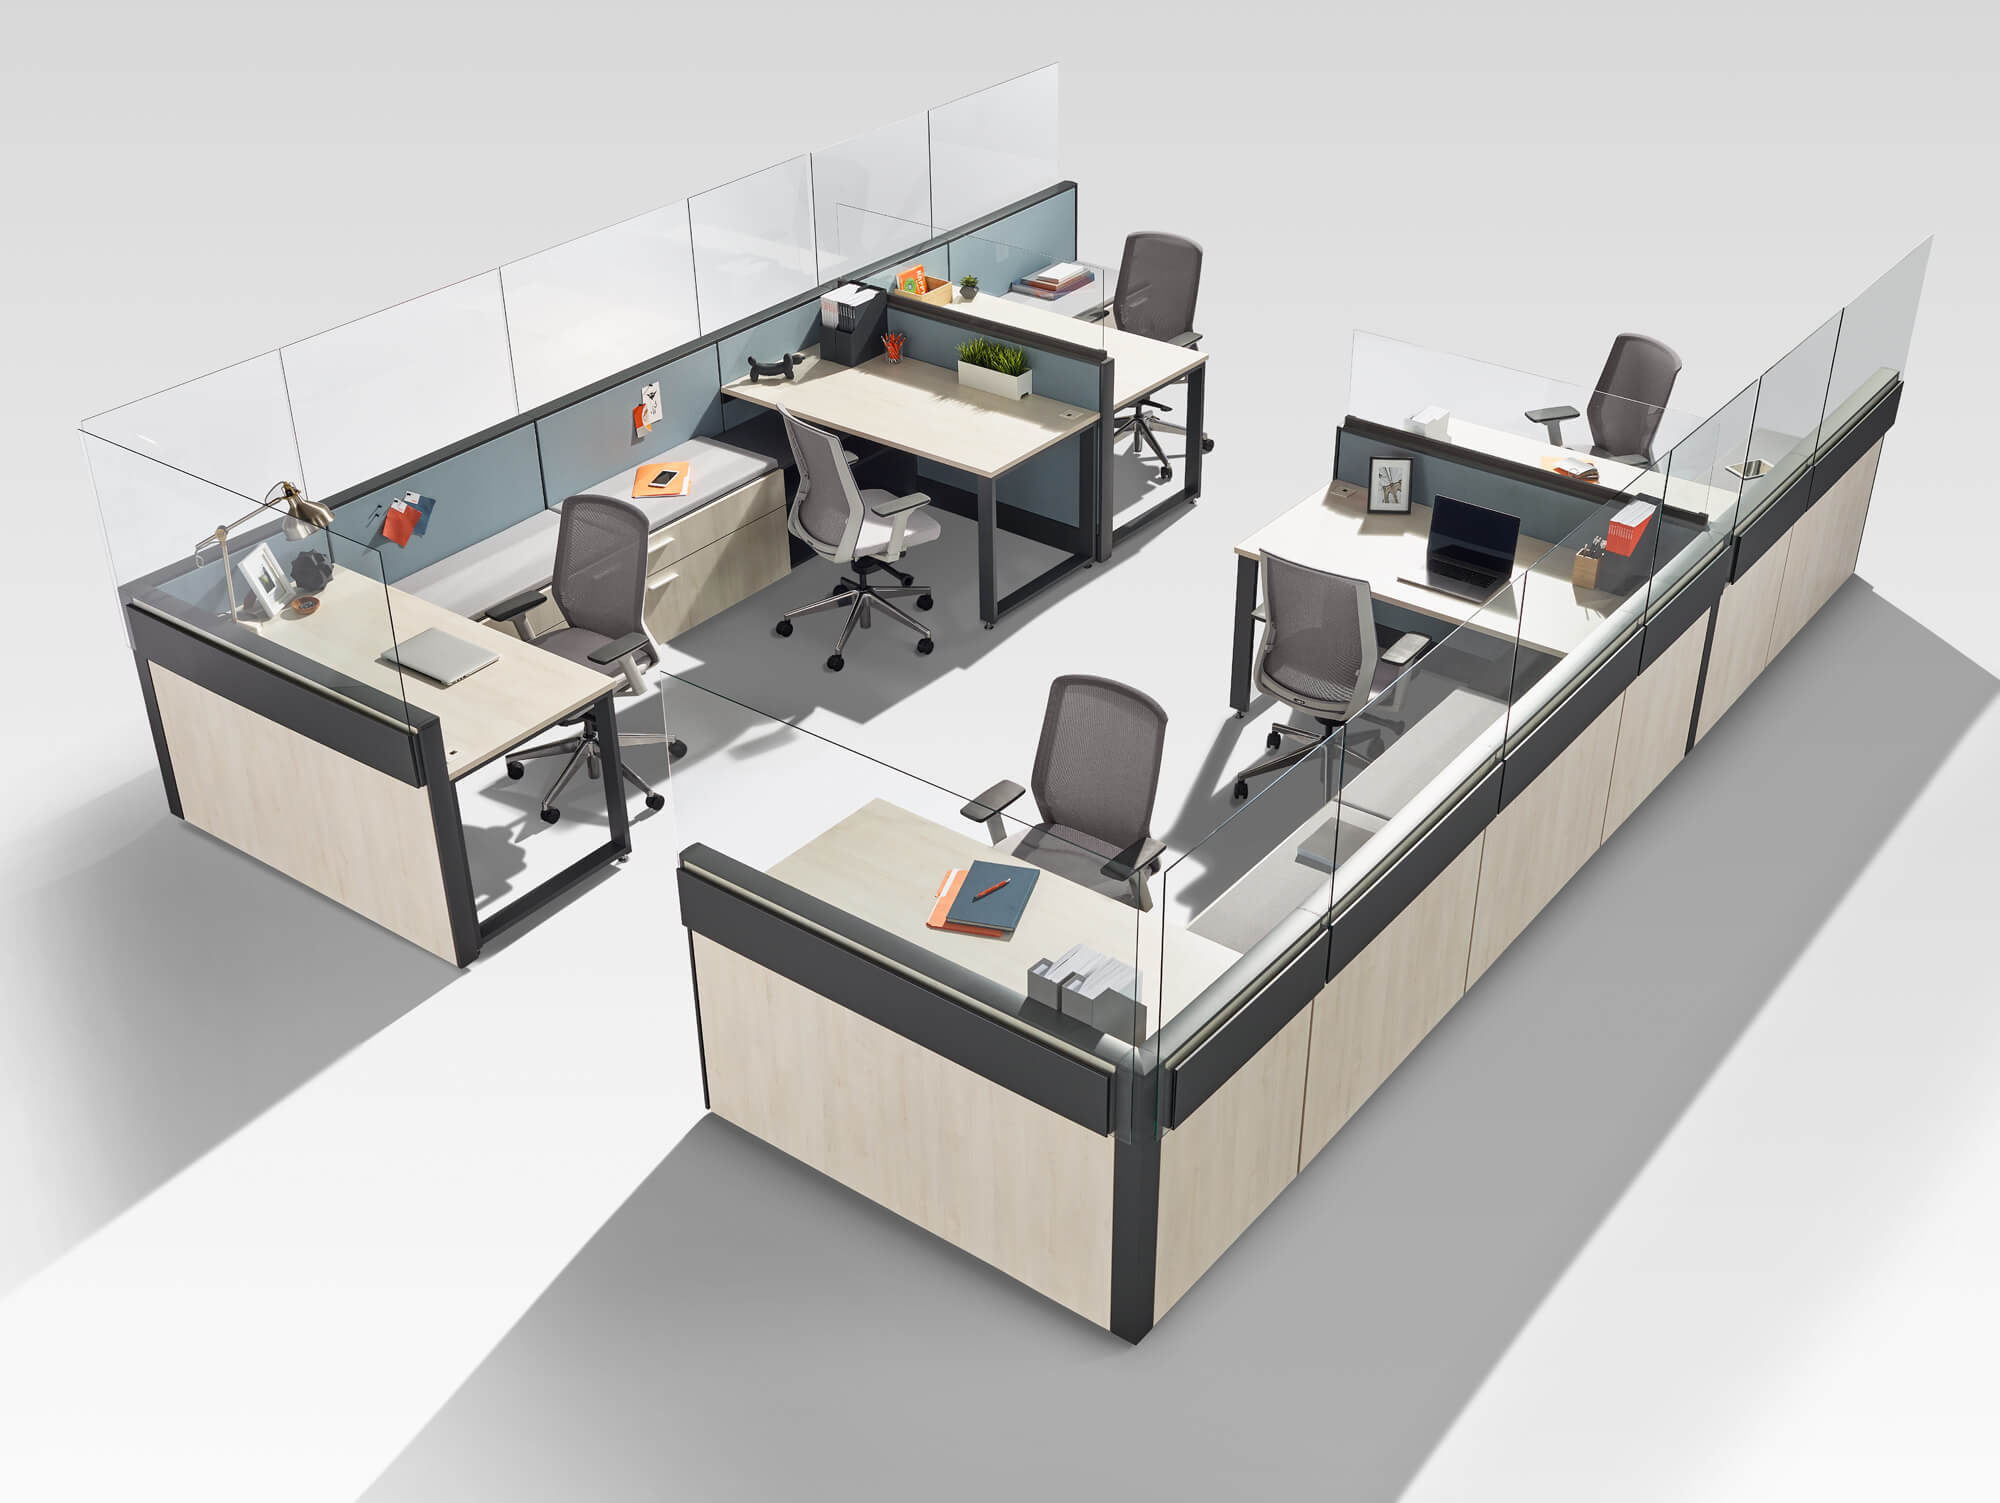 Office furniture supply and installation | The Benefits of Professional Office Furniture Space Planning